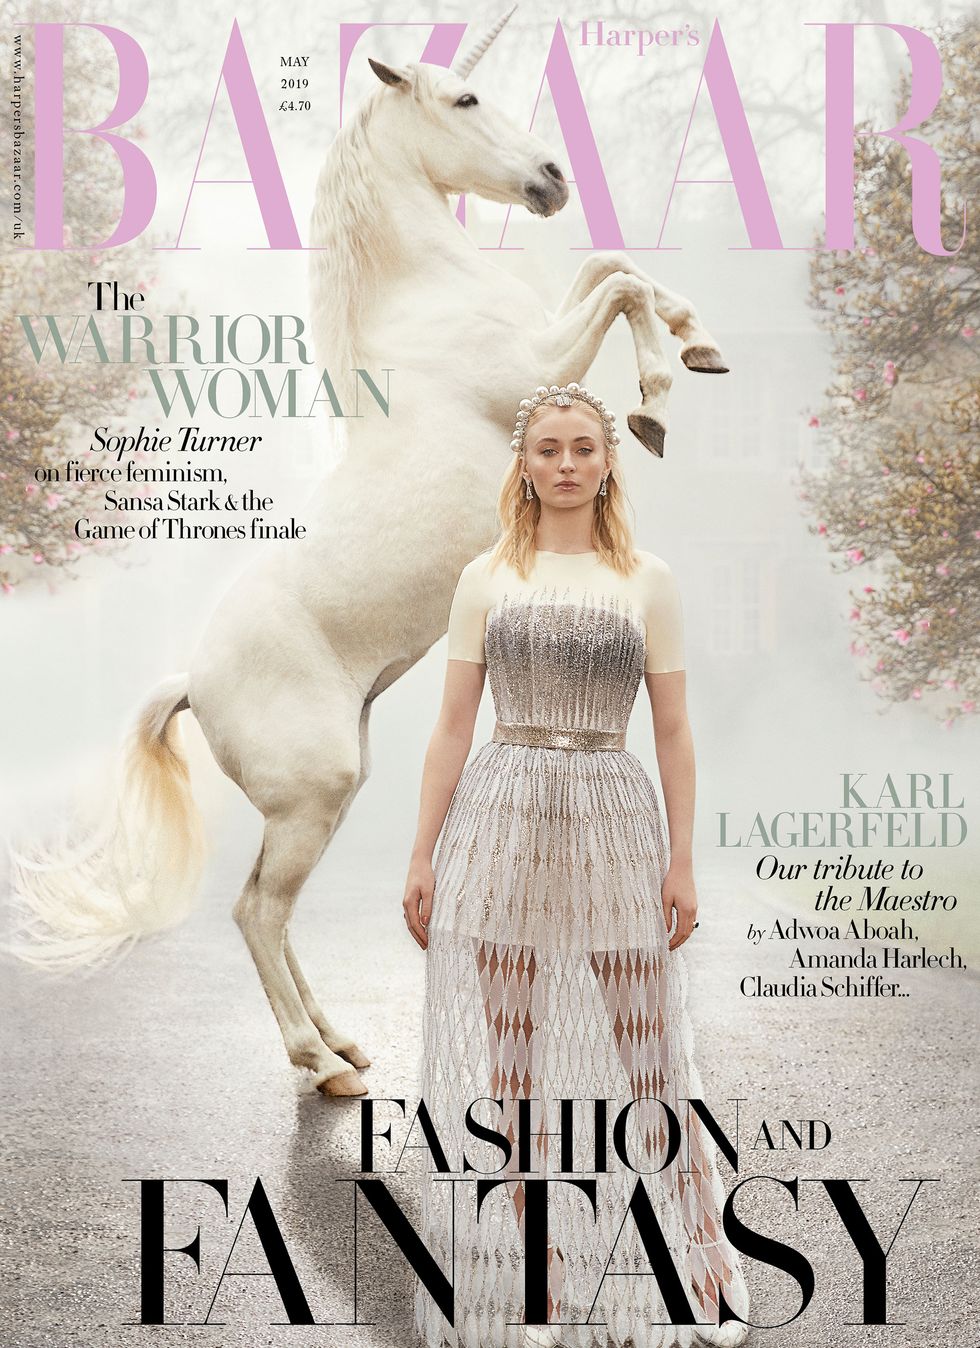 Sophie Turner on the May issue cover of Harper's Bazaar